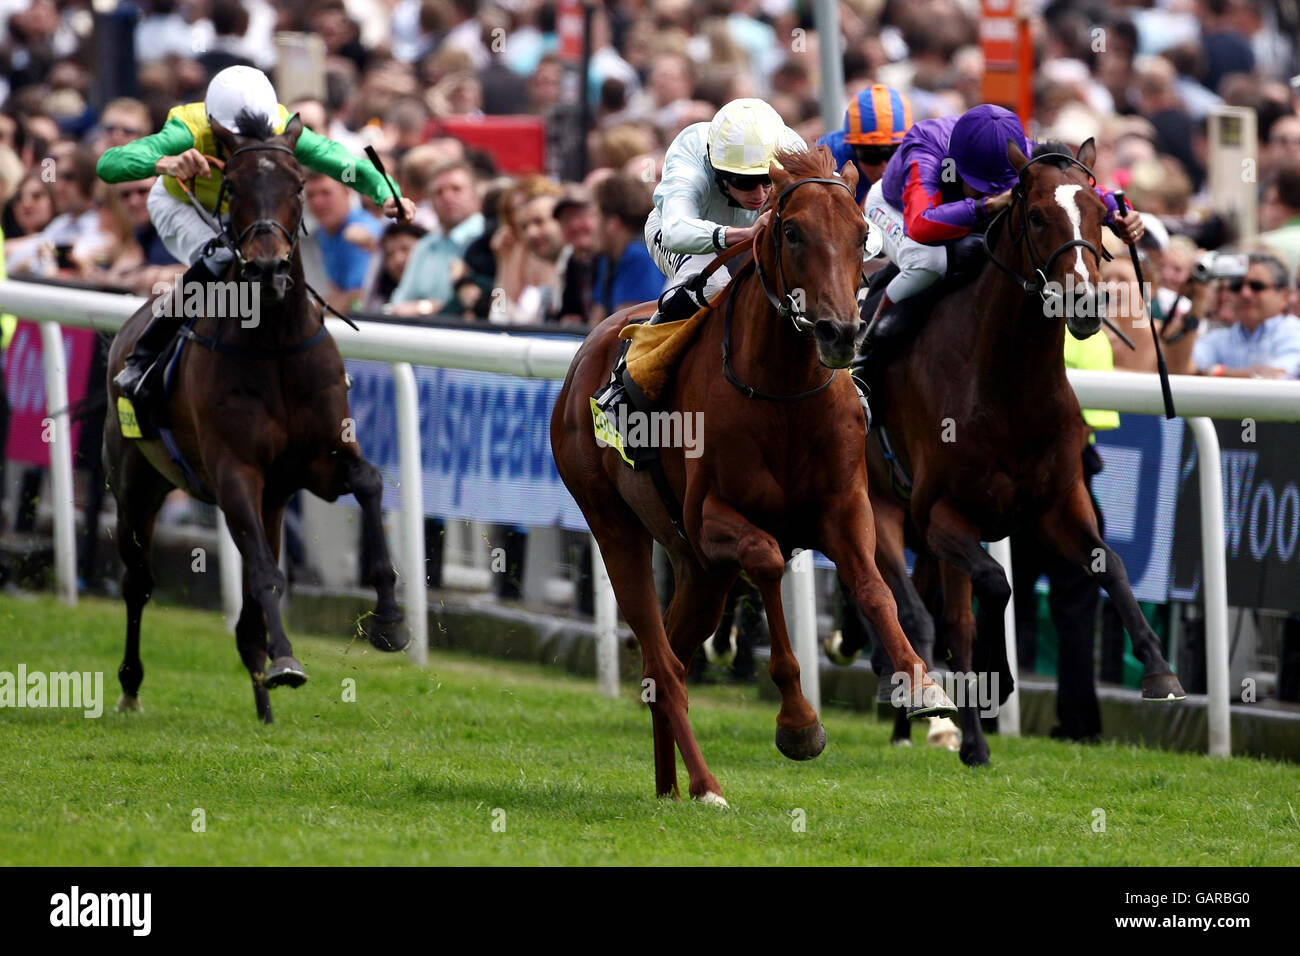 Conduit riden by Ryan Moore leads the field to win the totesportcasino.com Stake at Epsom Downs Racecourse, Surrey. Stock Photo